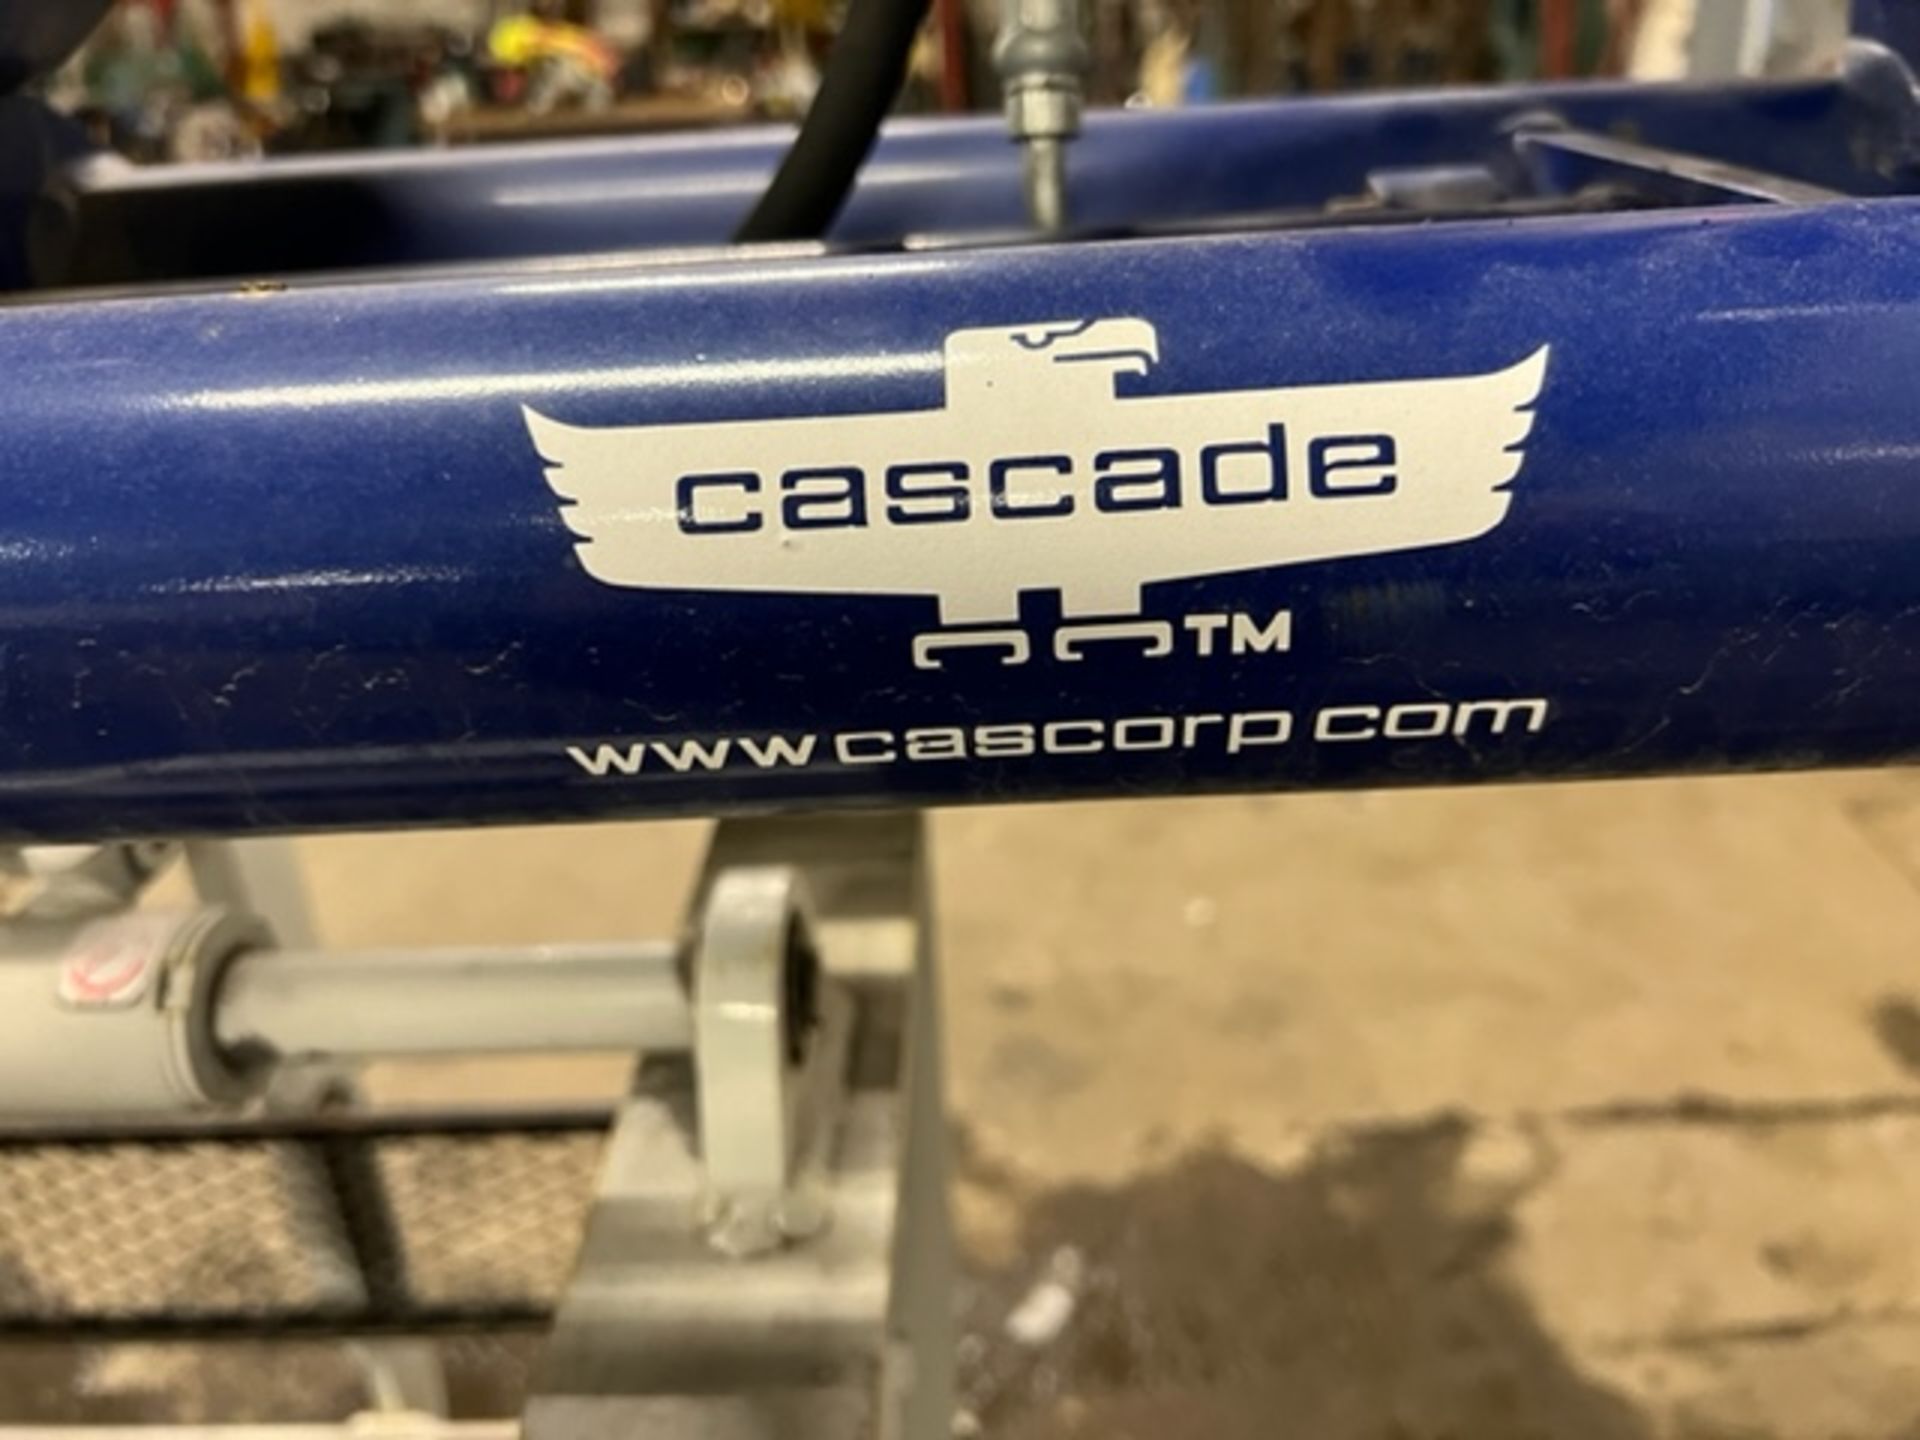 Cascade Forklift Attachment - Forklift Box Skid Grapple Clamp Unit MINT - Image 4 of 4